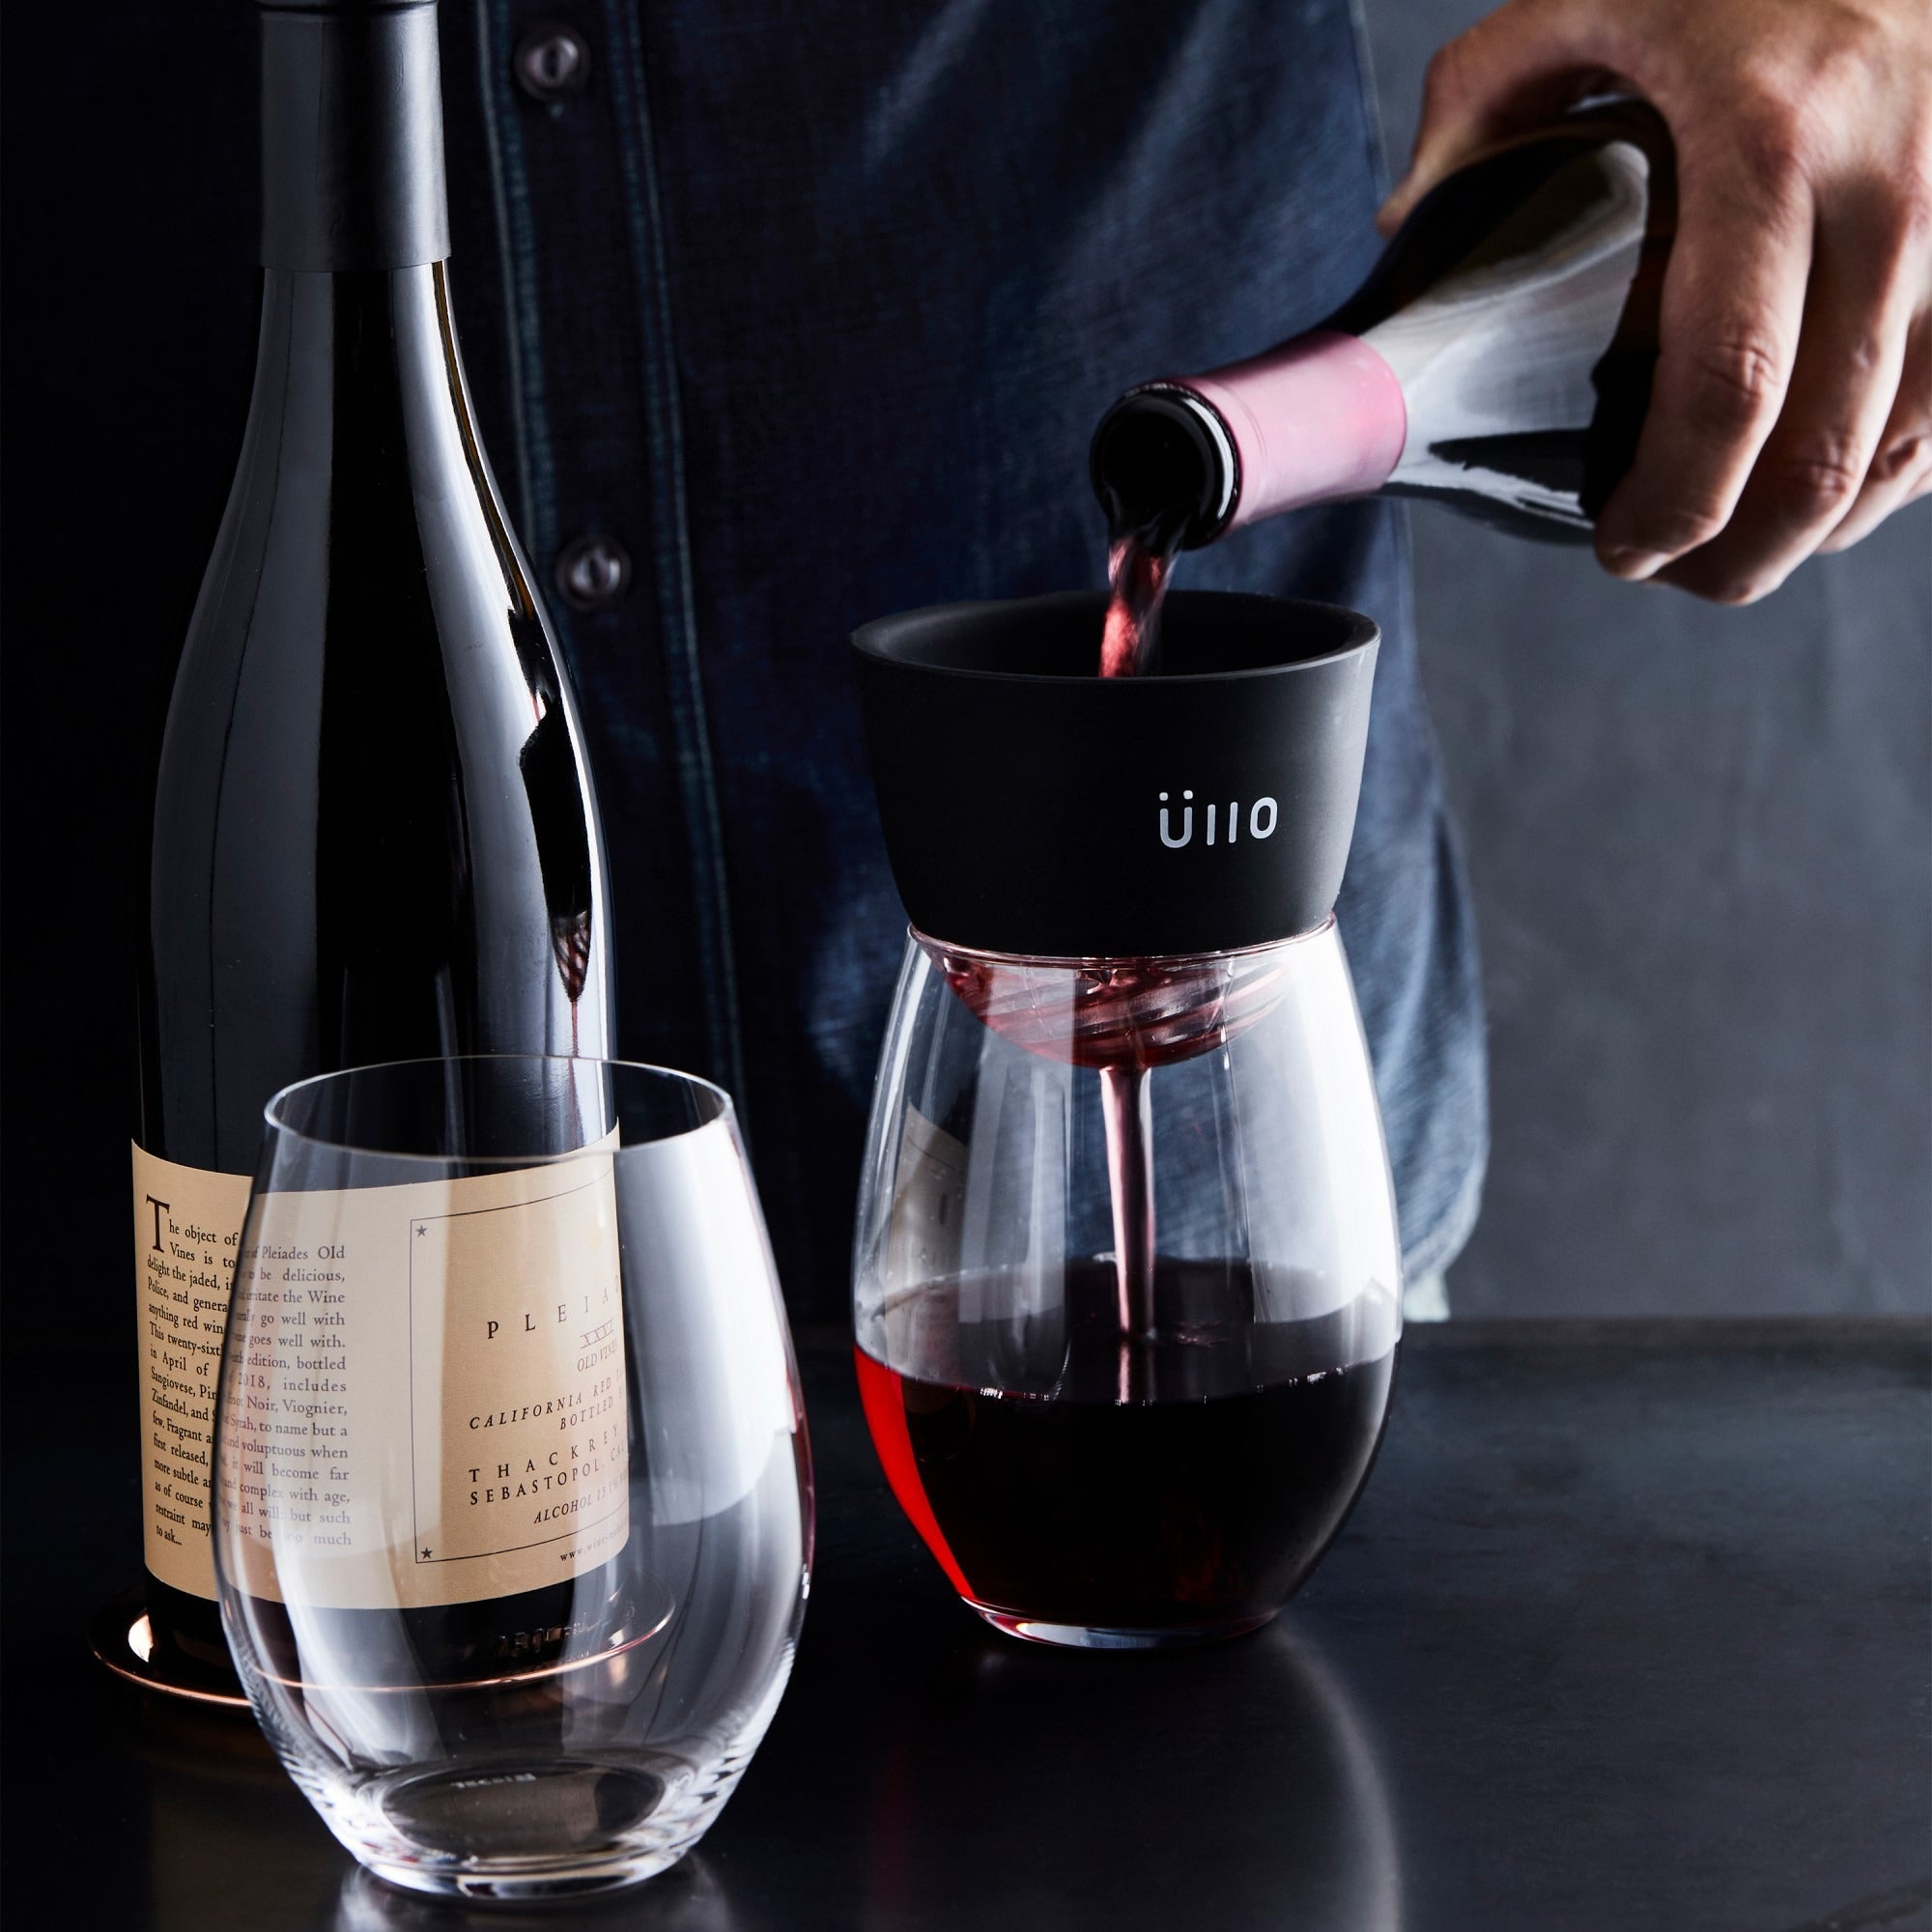 Model pouring red wine through Ullo purifier into wine glasses